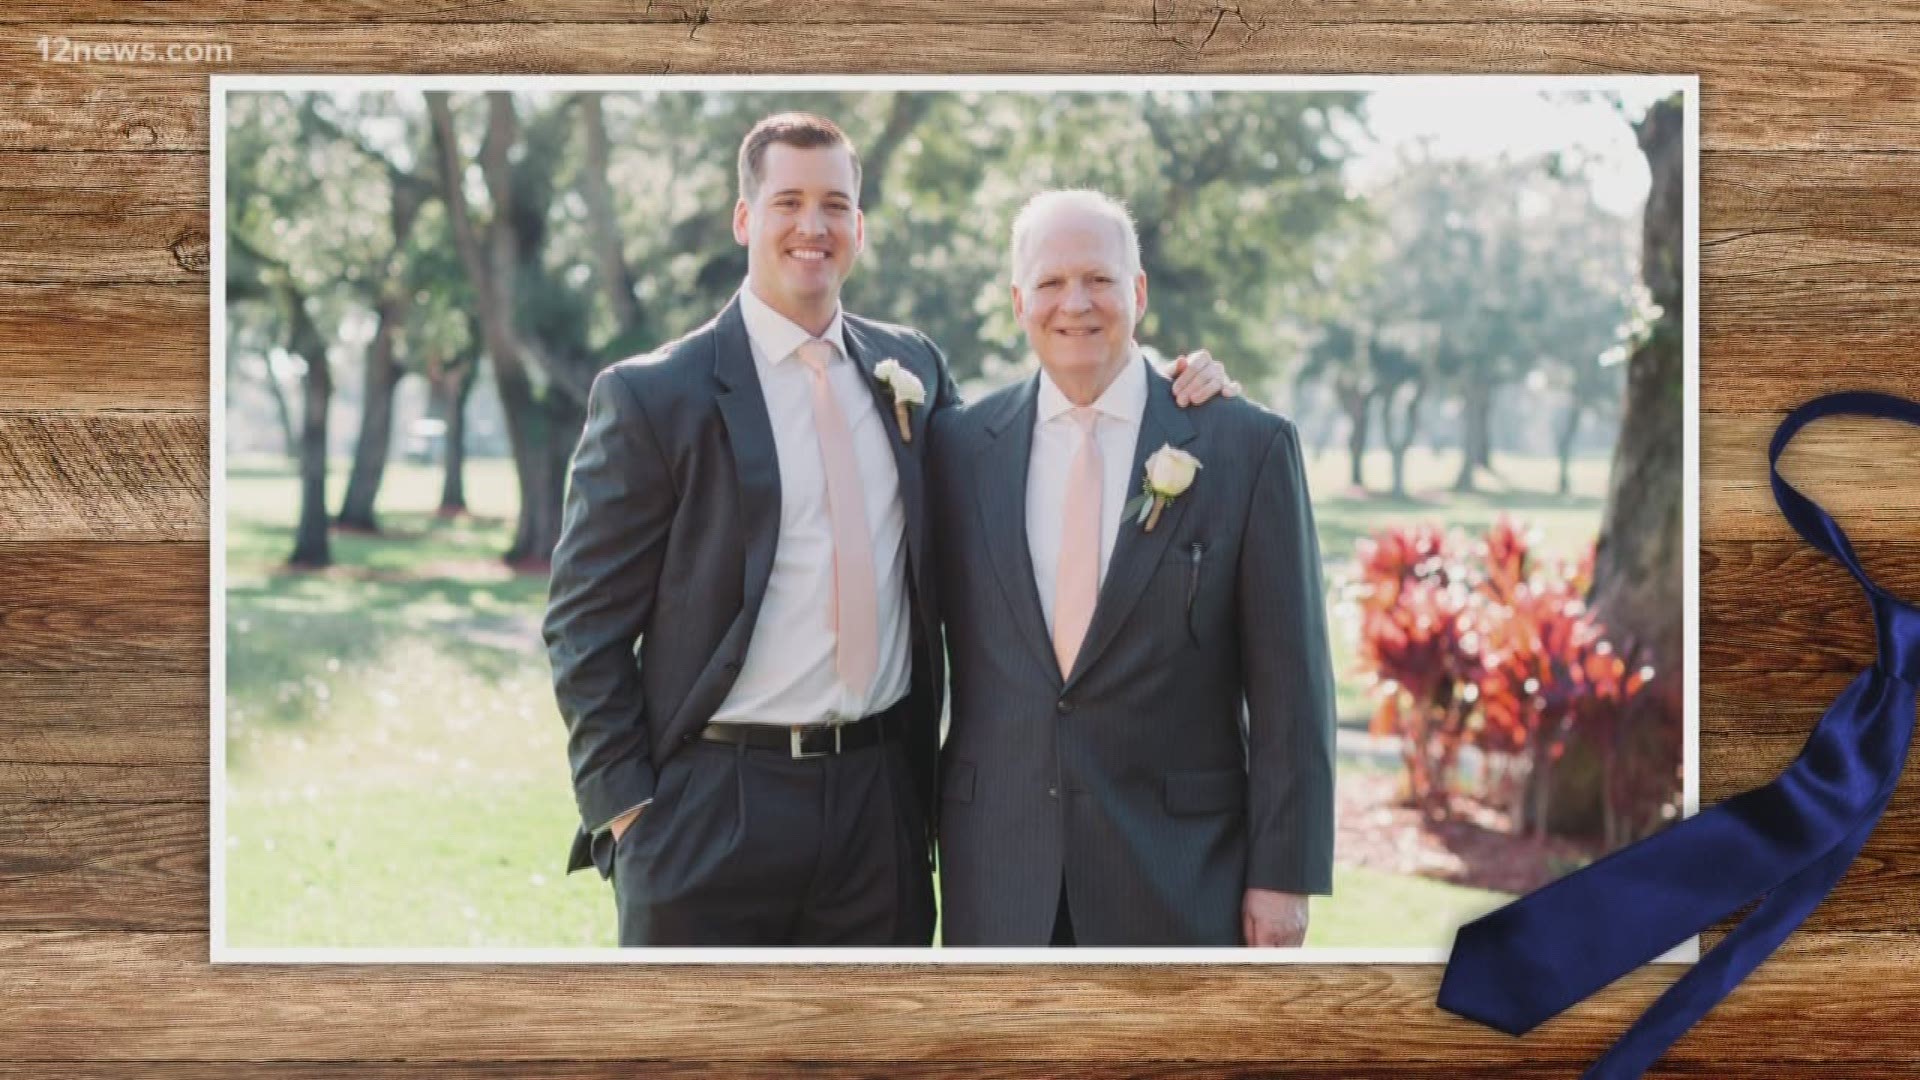 The anchors and reporters at 12 News are sharing photos of their dads before Father's Day on Sunday.